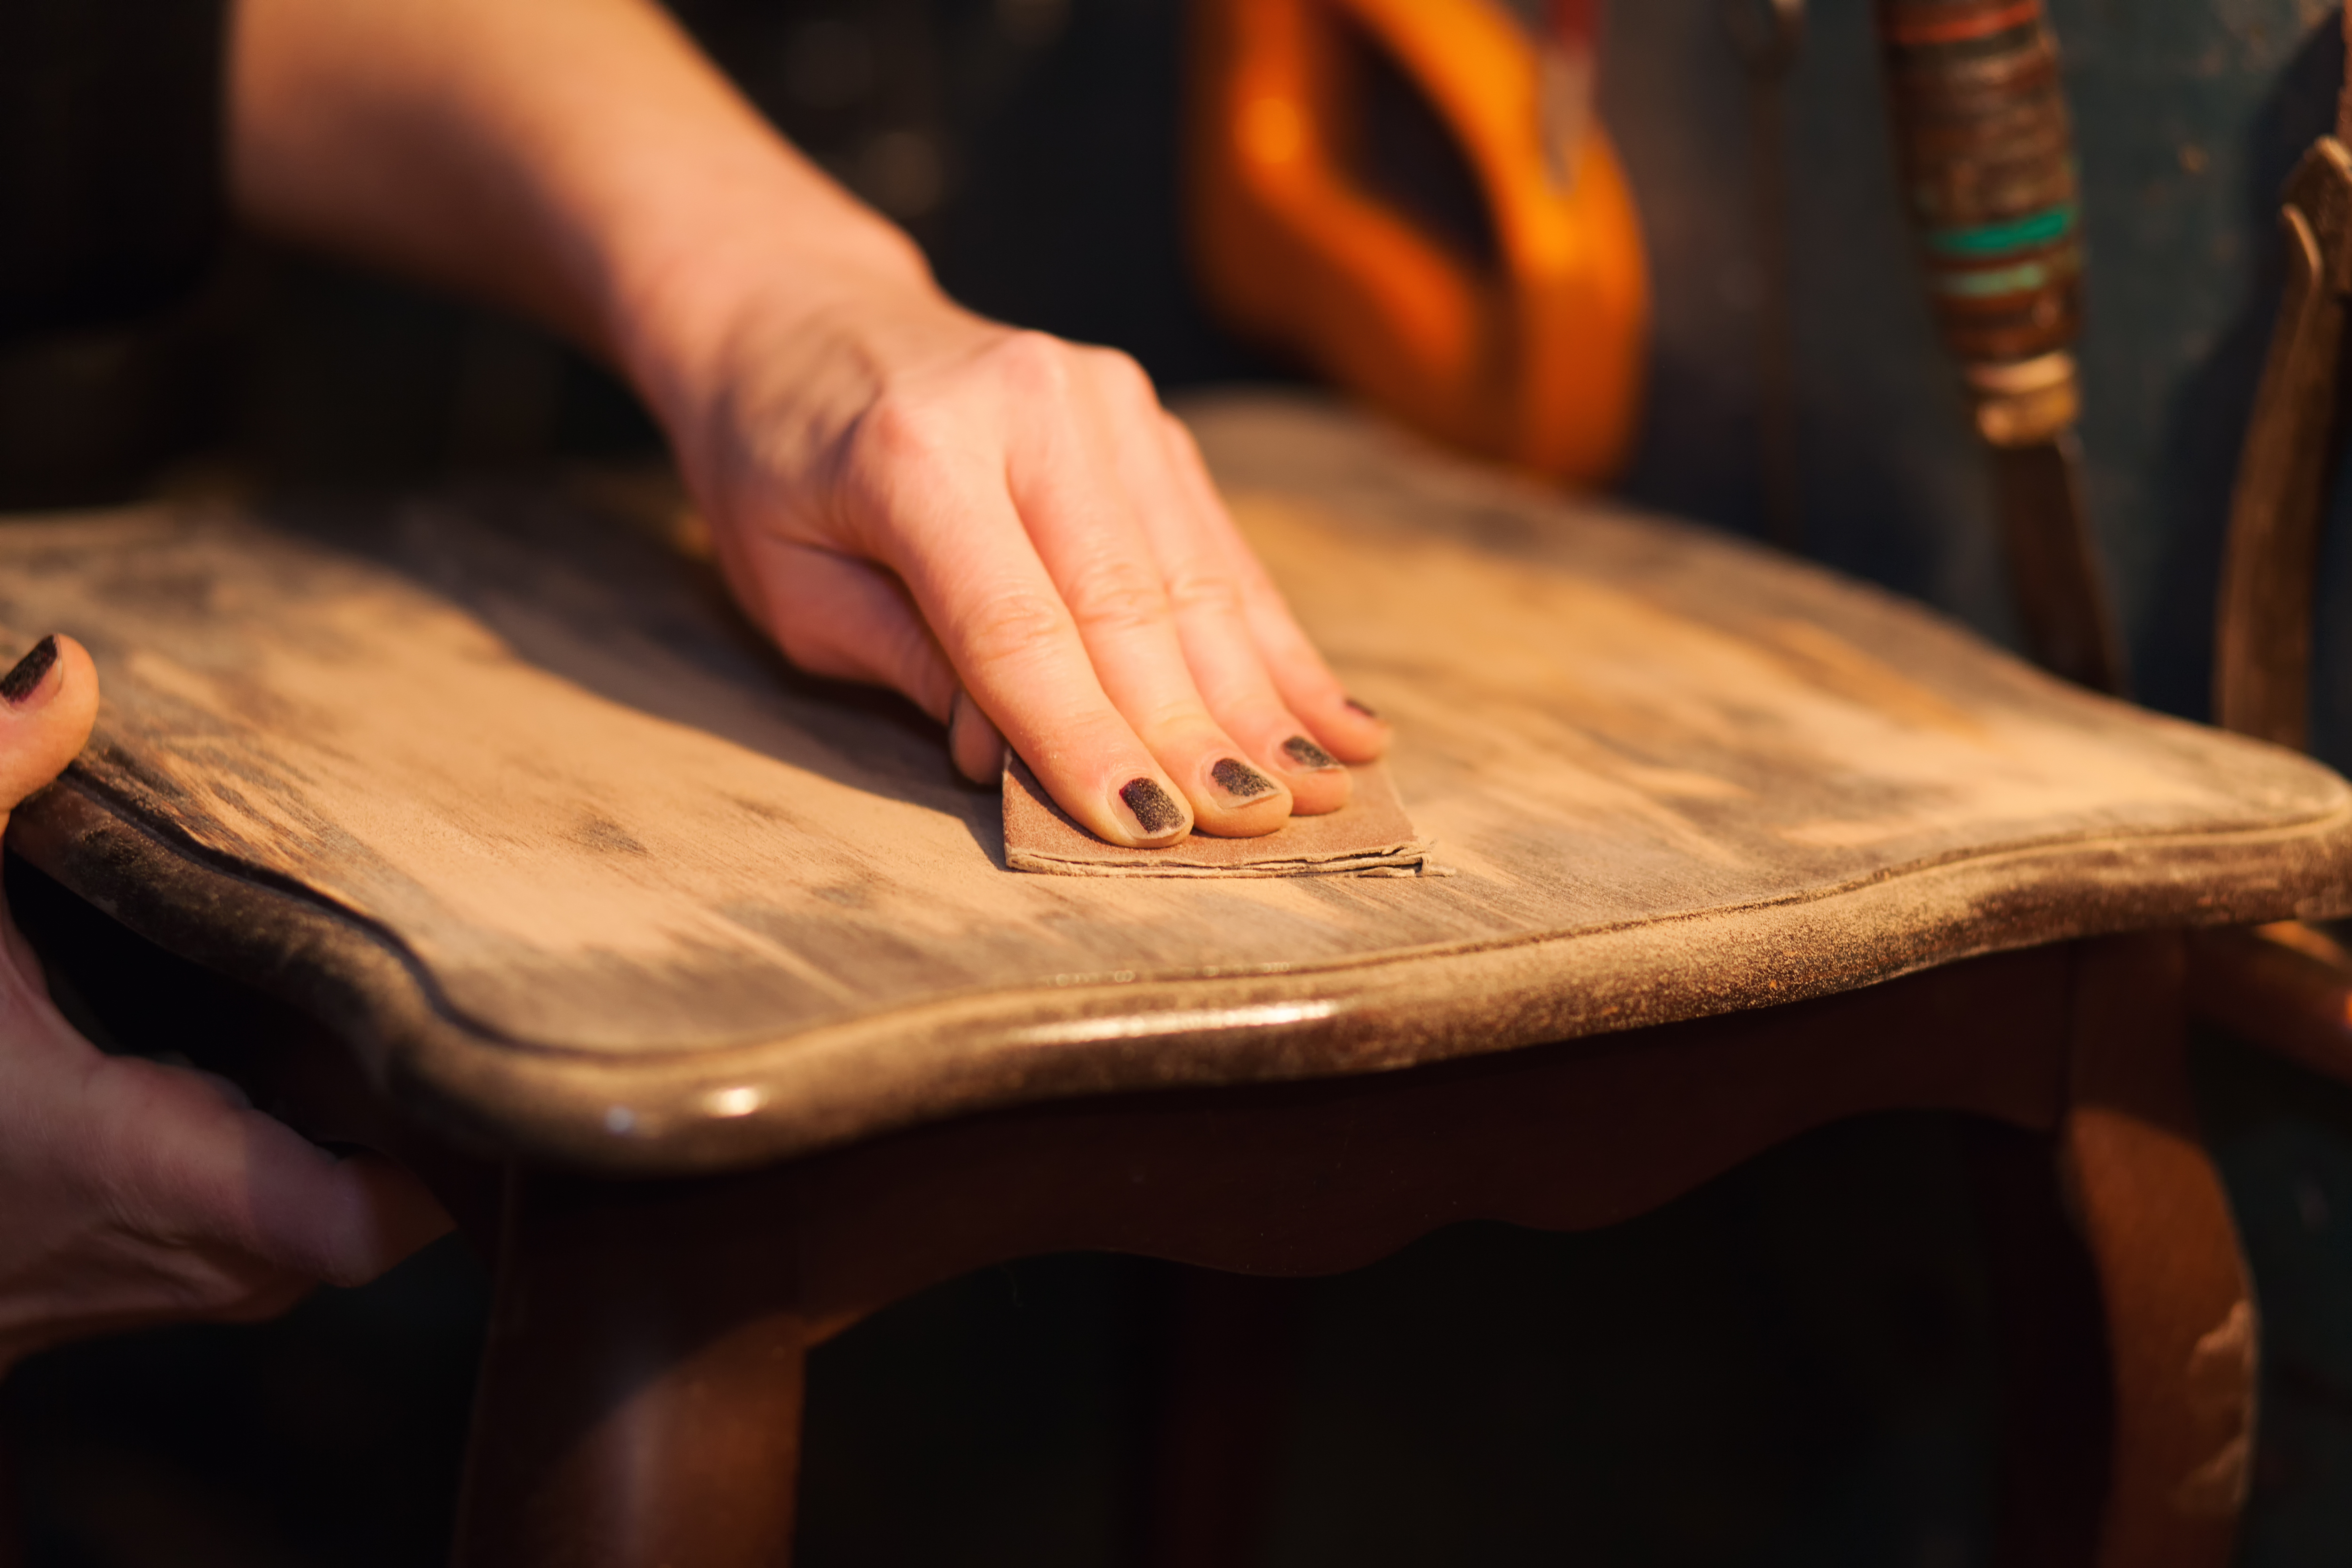 Woman sanding a piece of wood furniture